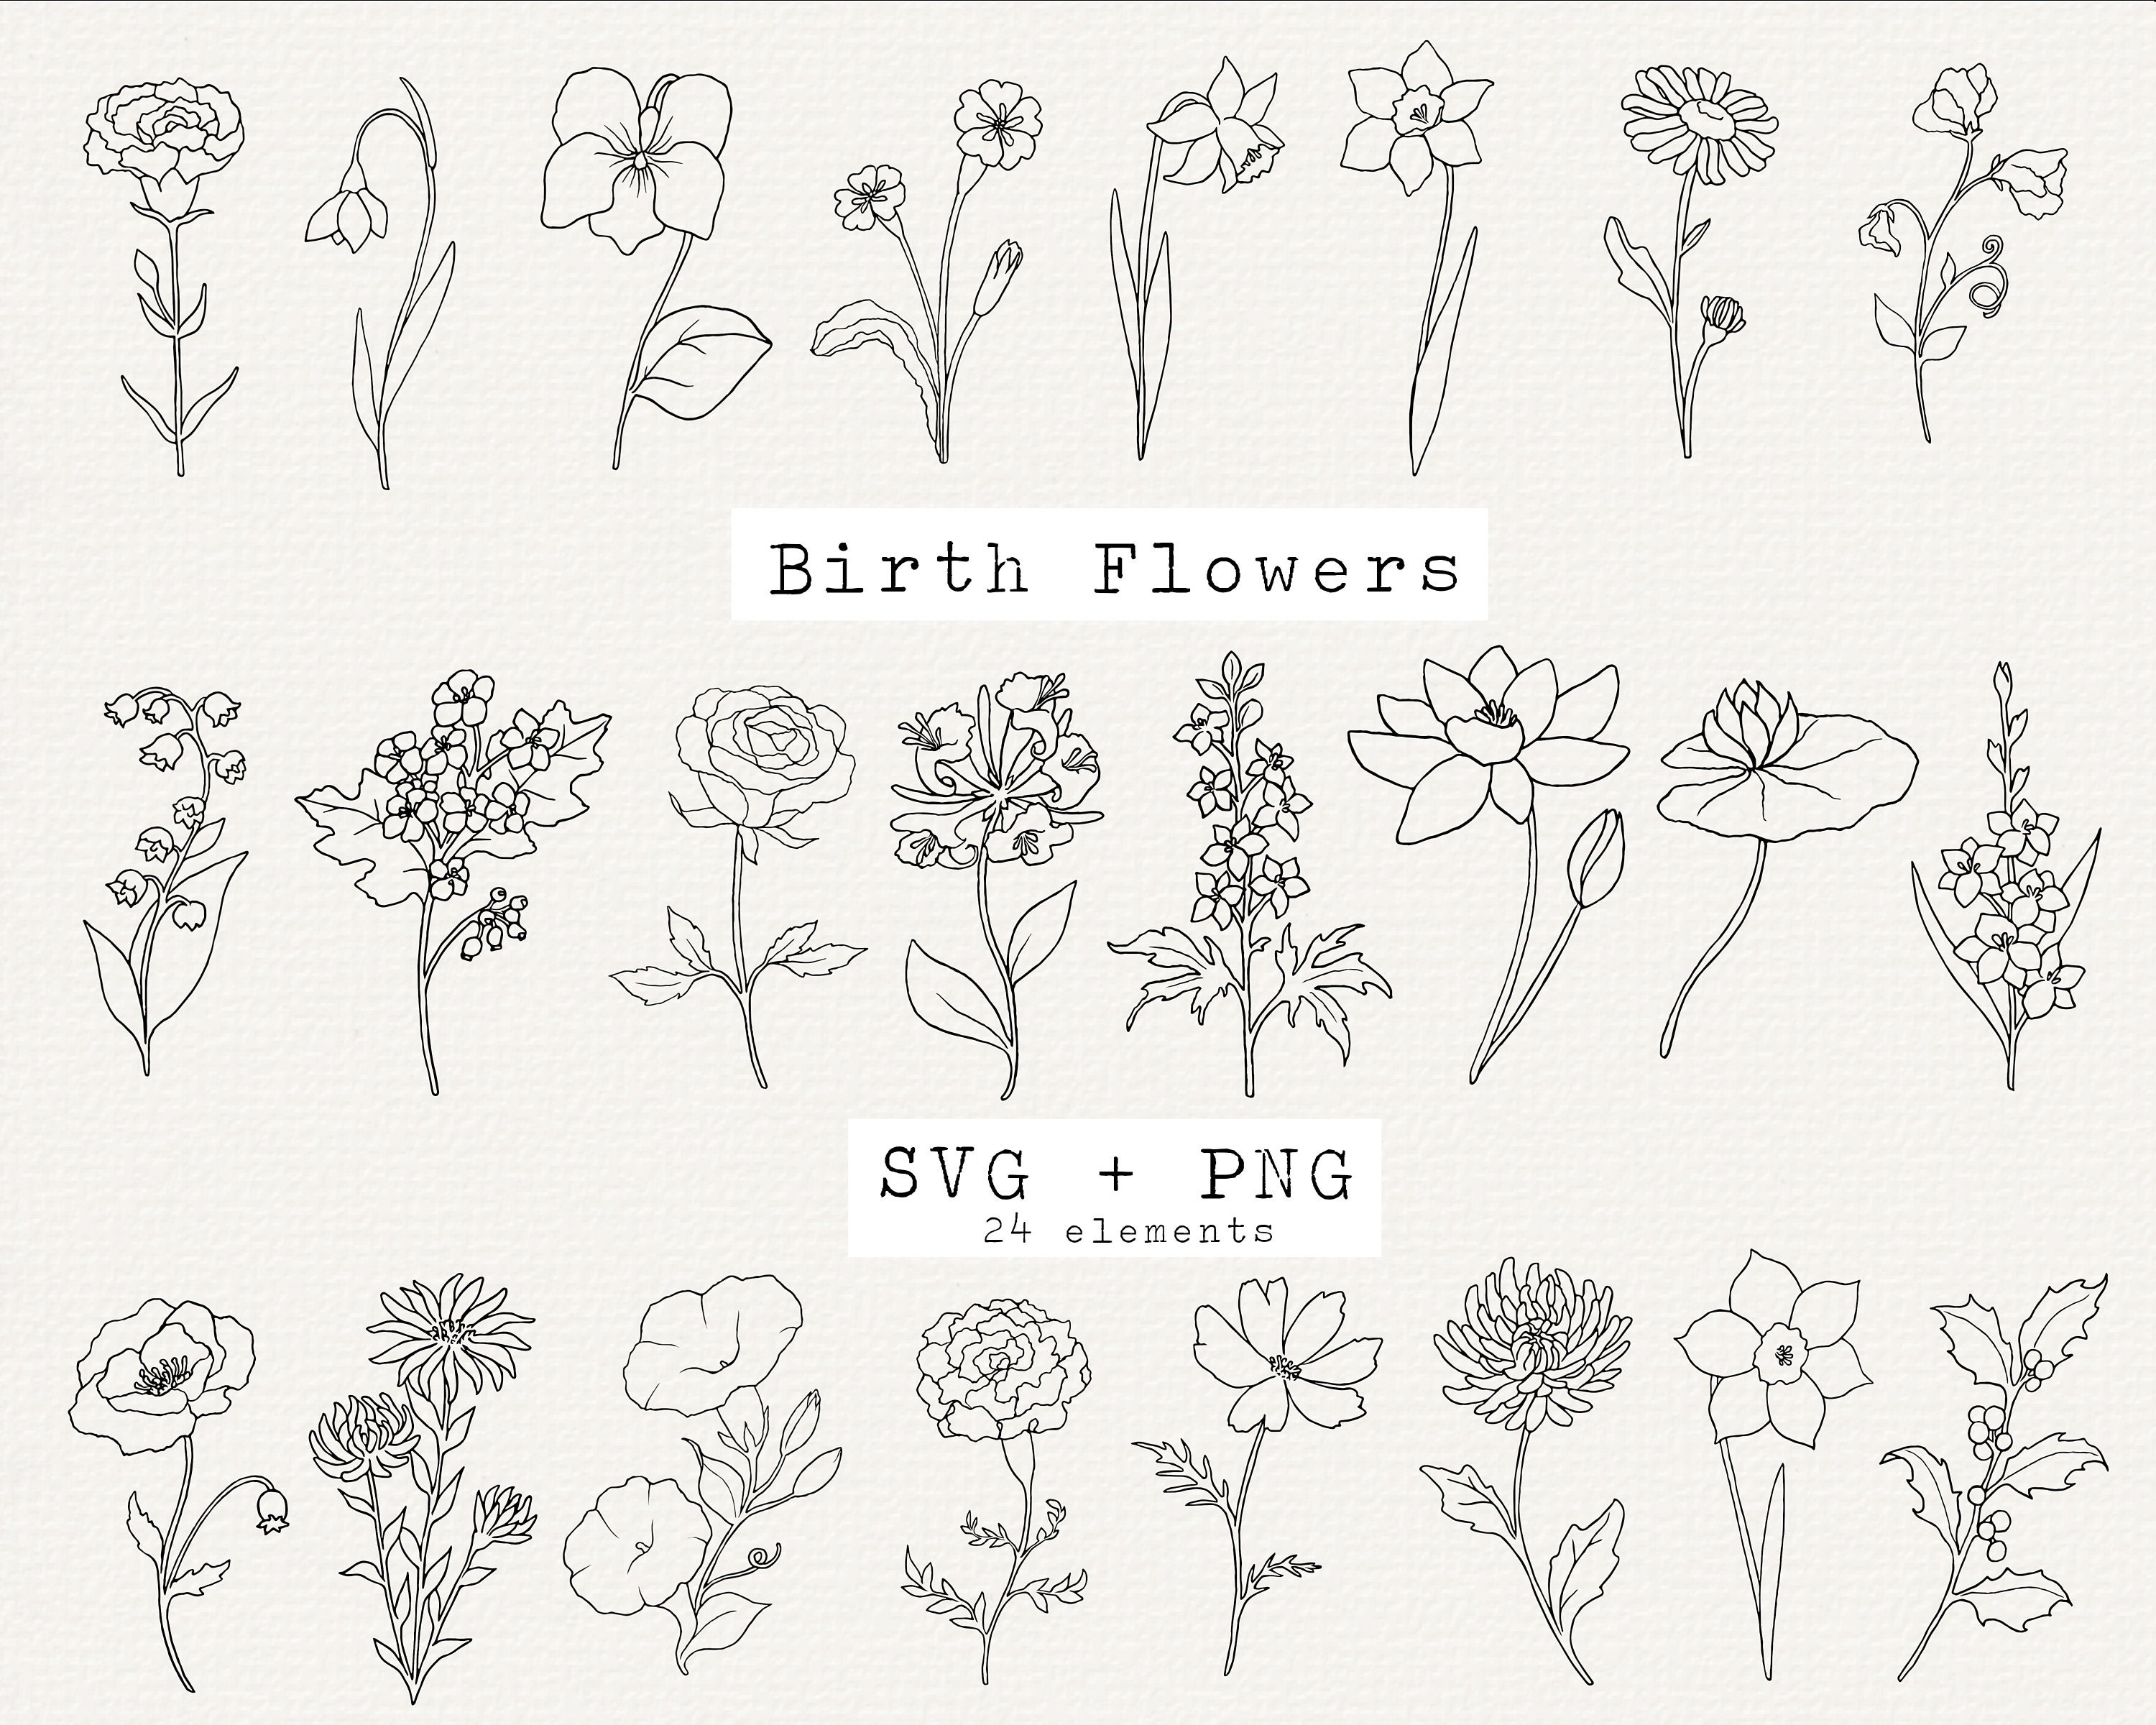 5. Matching Family Birth Flower Tattoos for Siblings - wide 2